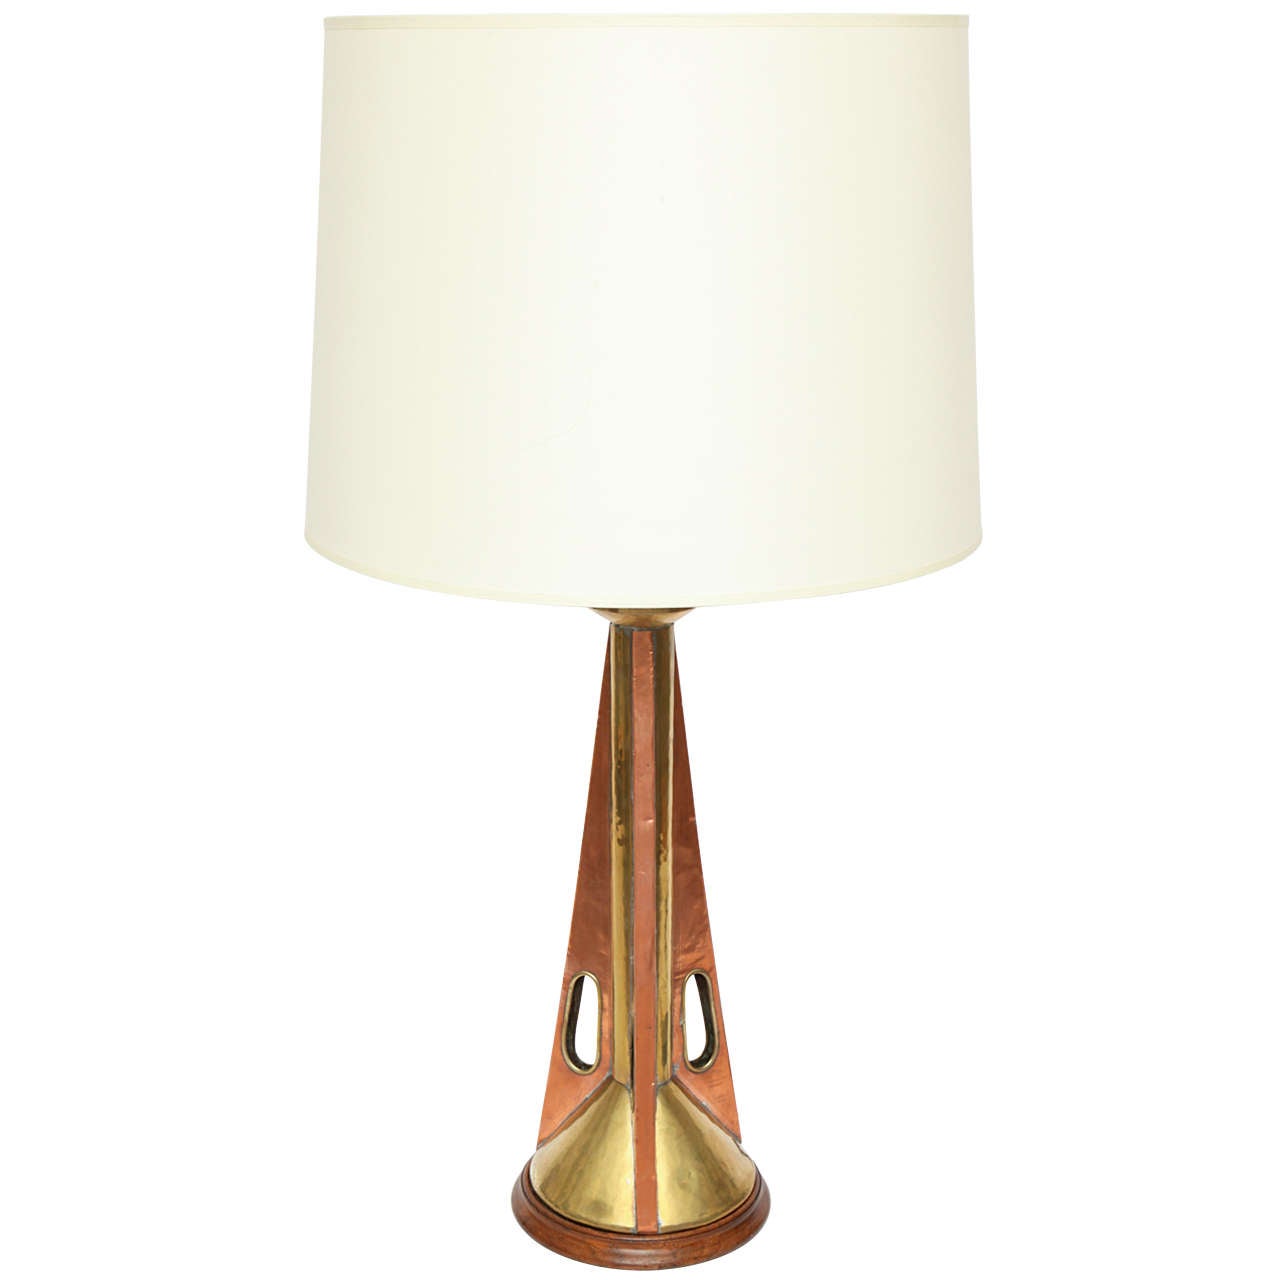  Table Lamp Mid Century Modern Architectural wood and brass 1960's im Angebot